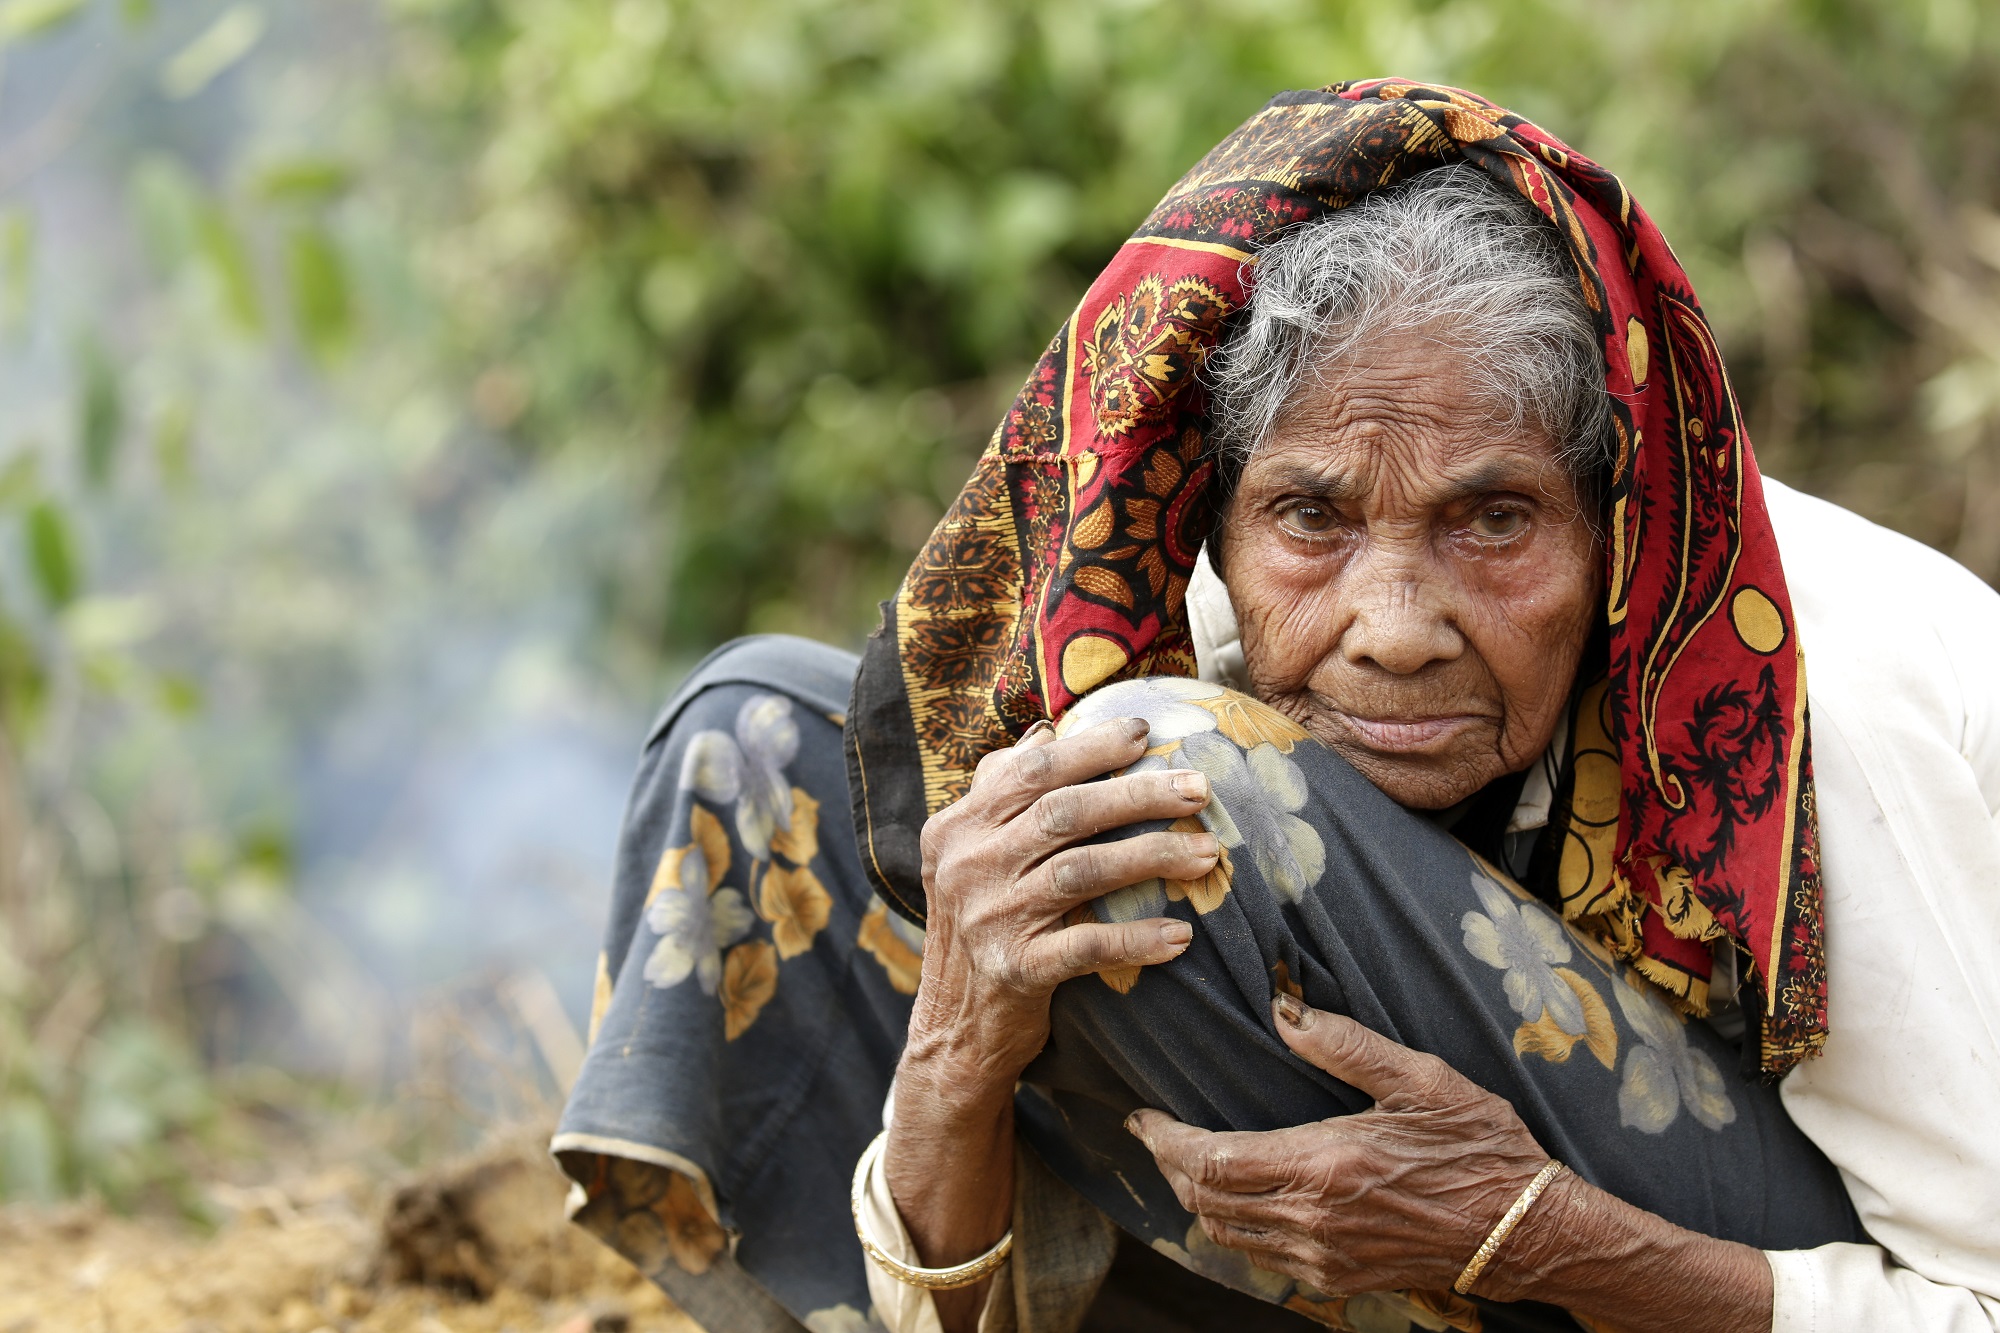  _663_https://www.helpage.org/silo/images/kulle--older-woman-from-myanmar-who-fled-to-bangladesh_2000x1333.jpg